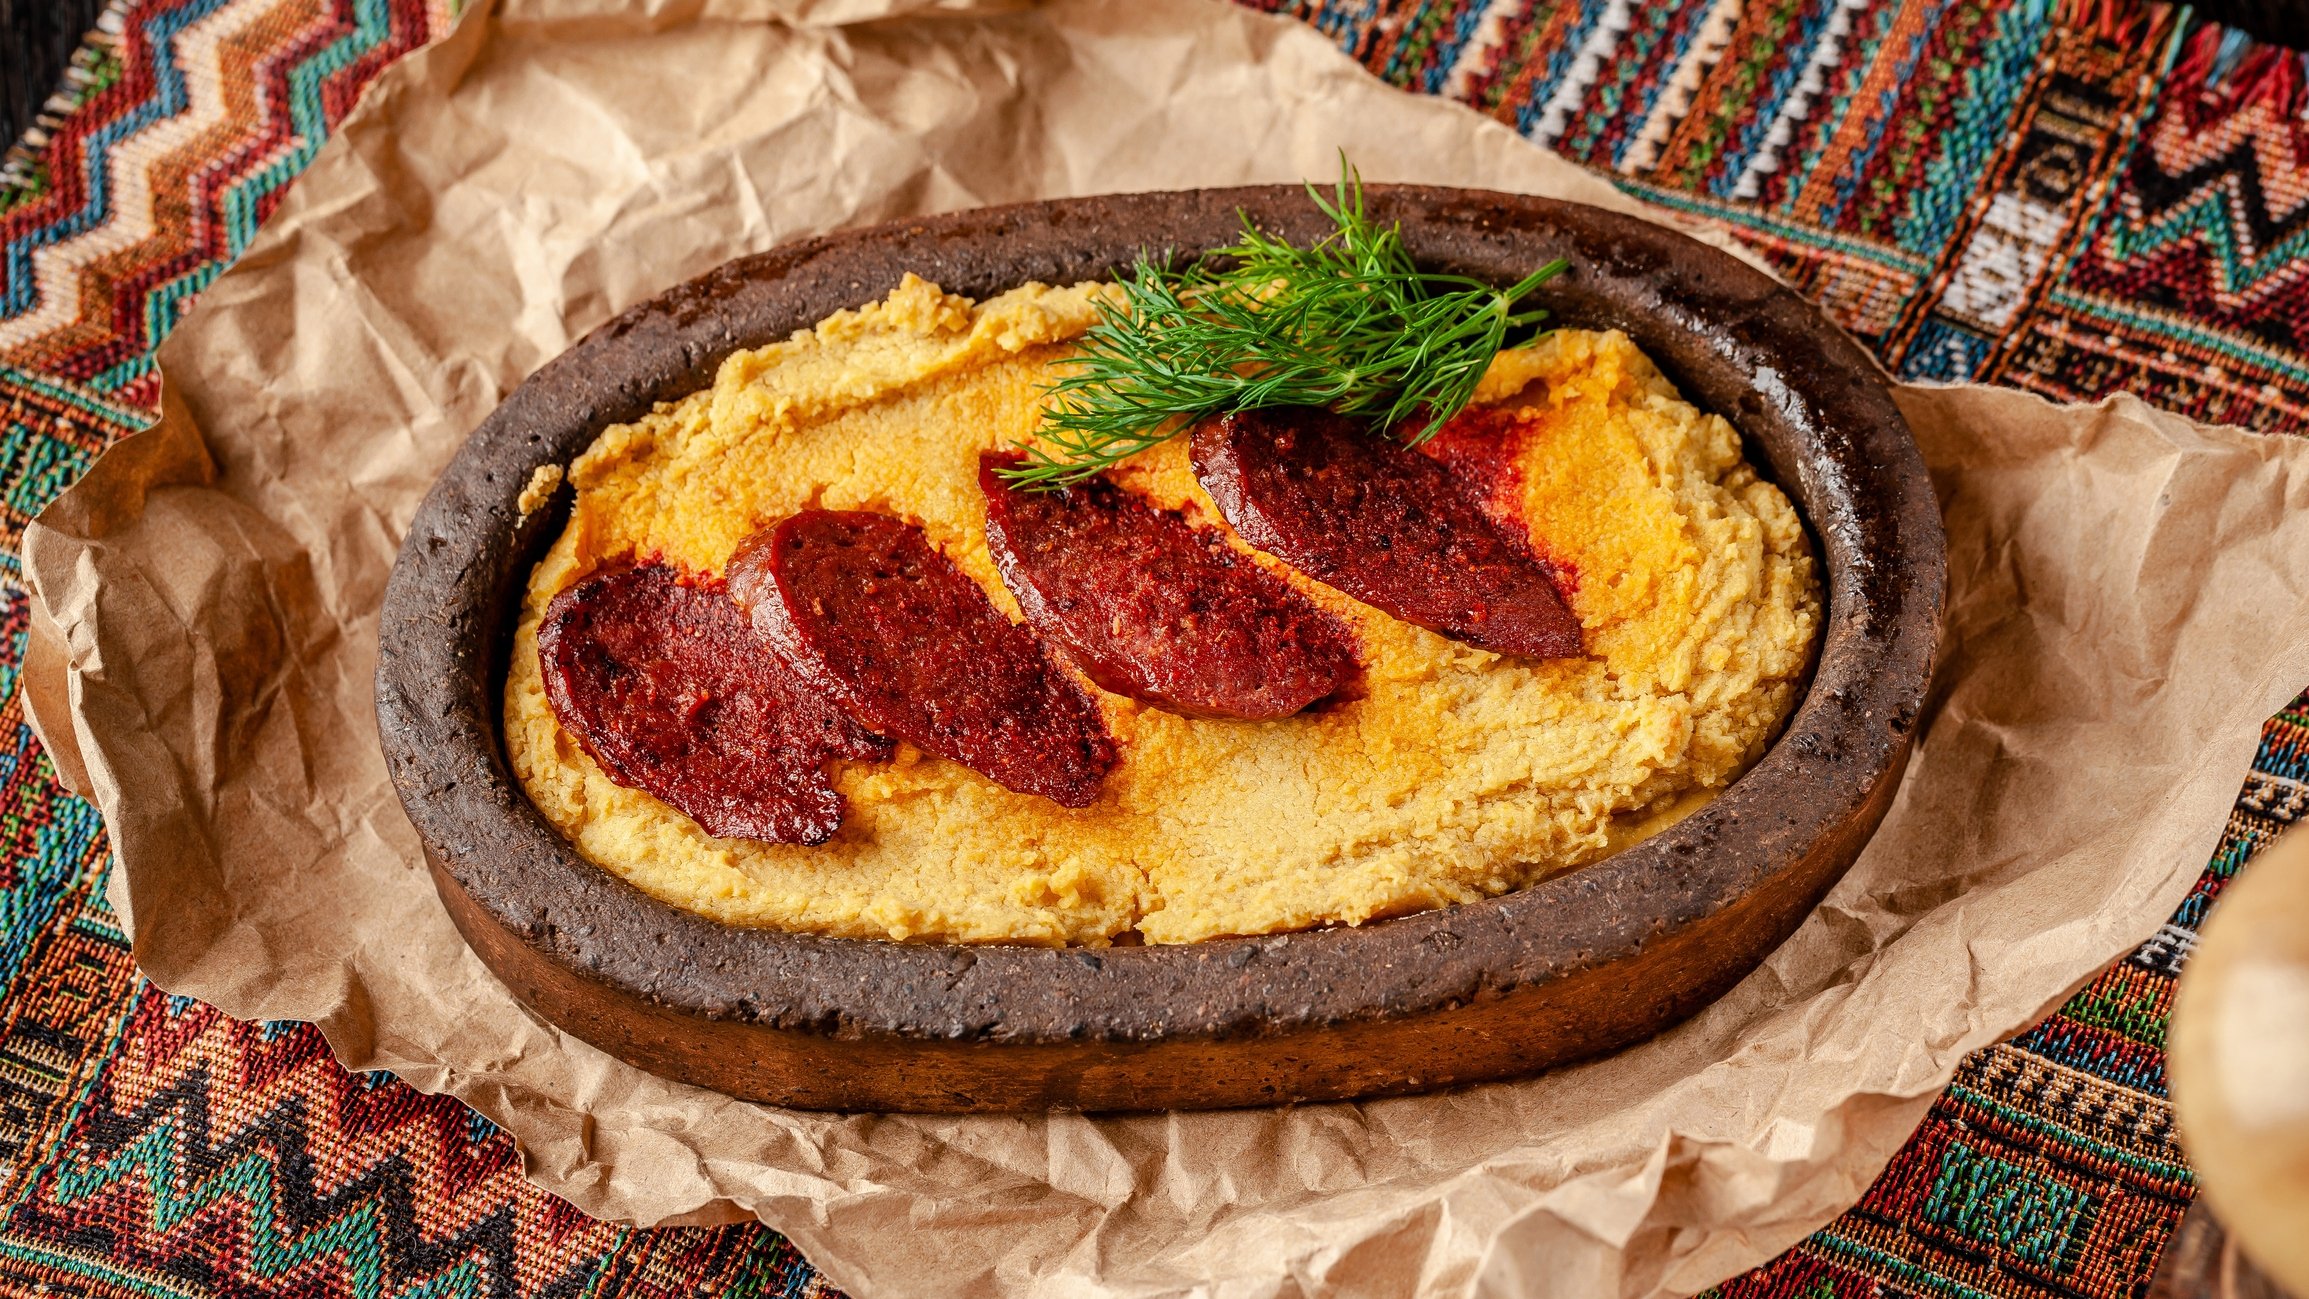 Hummus with slices of sucuk (Turkish sausage), in a clay plate, the southeastern Turkish way. (iStock Photo)